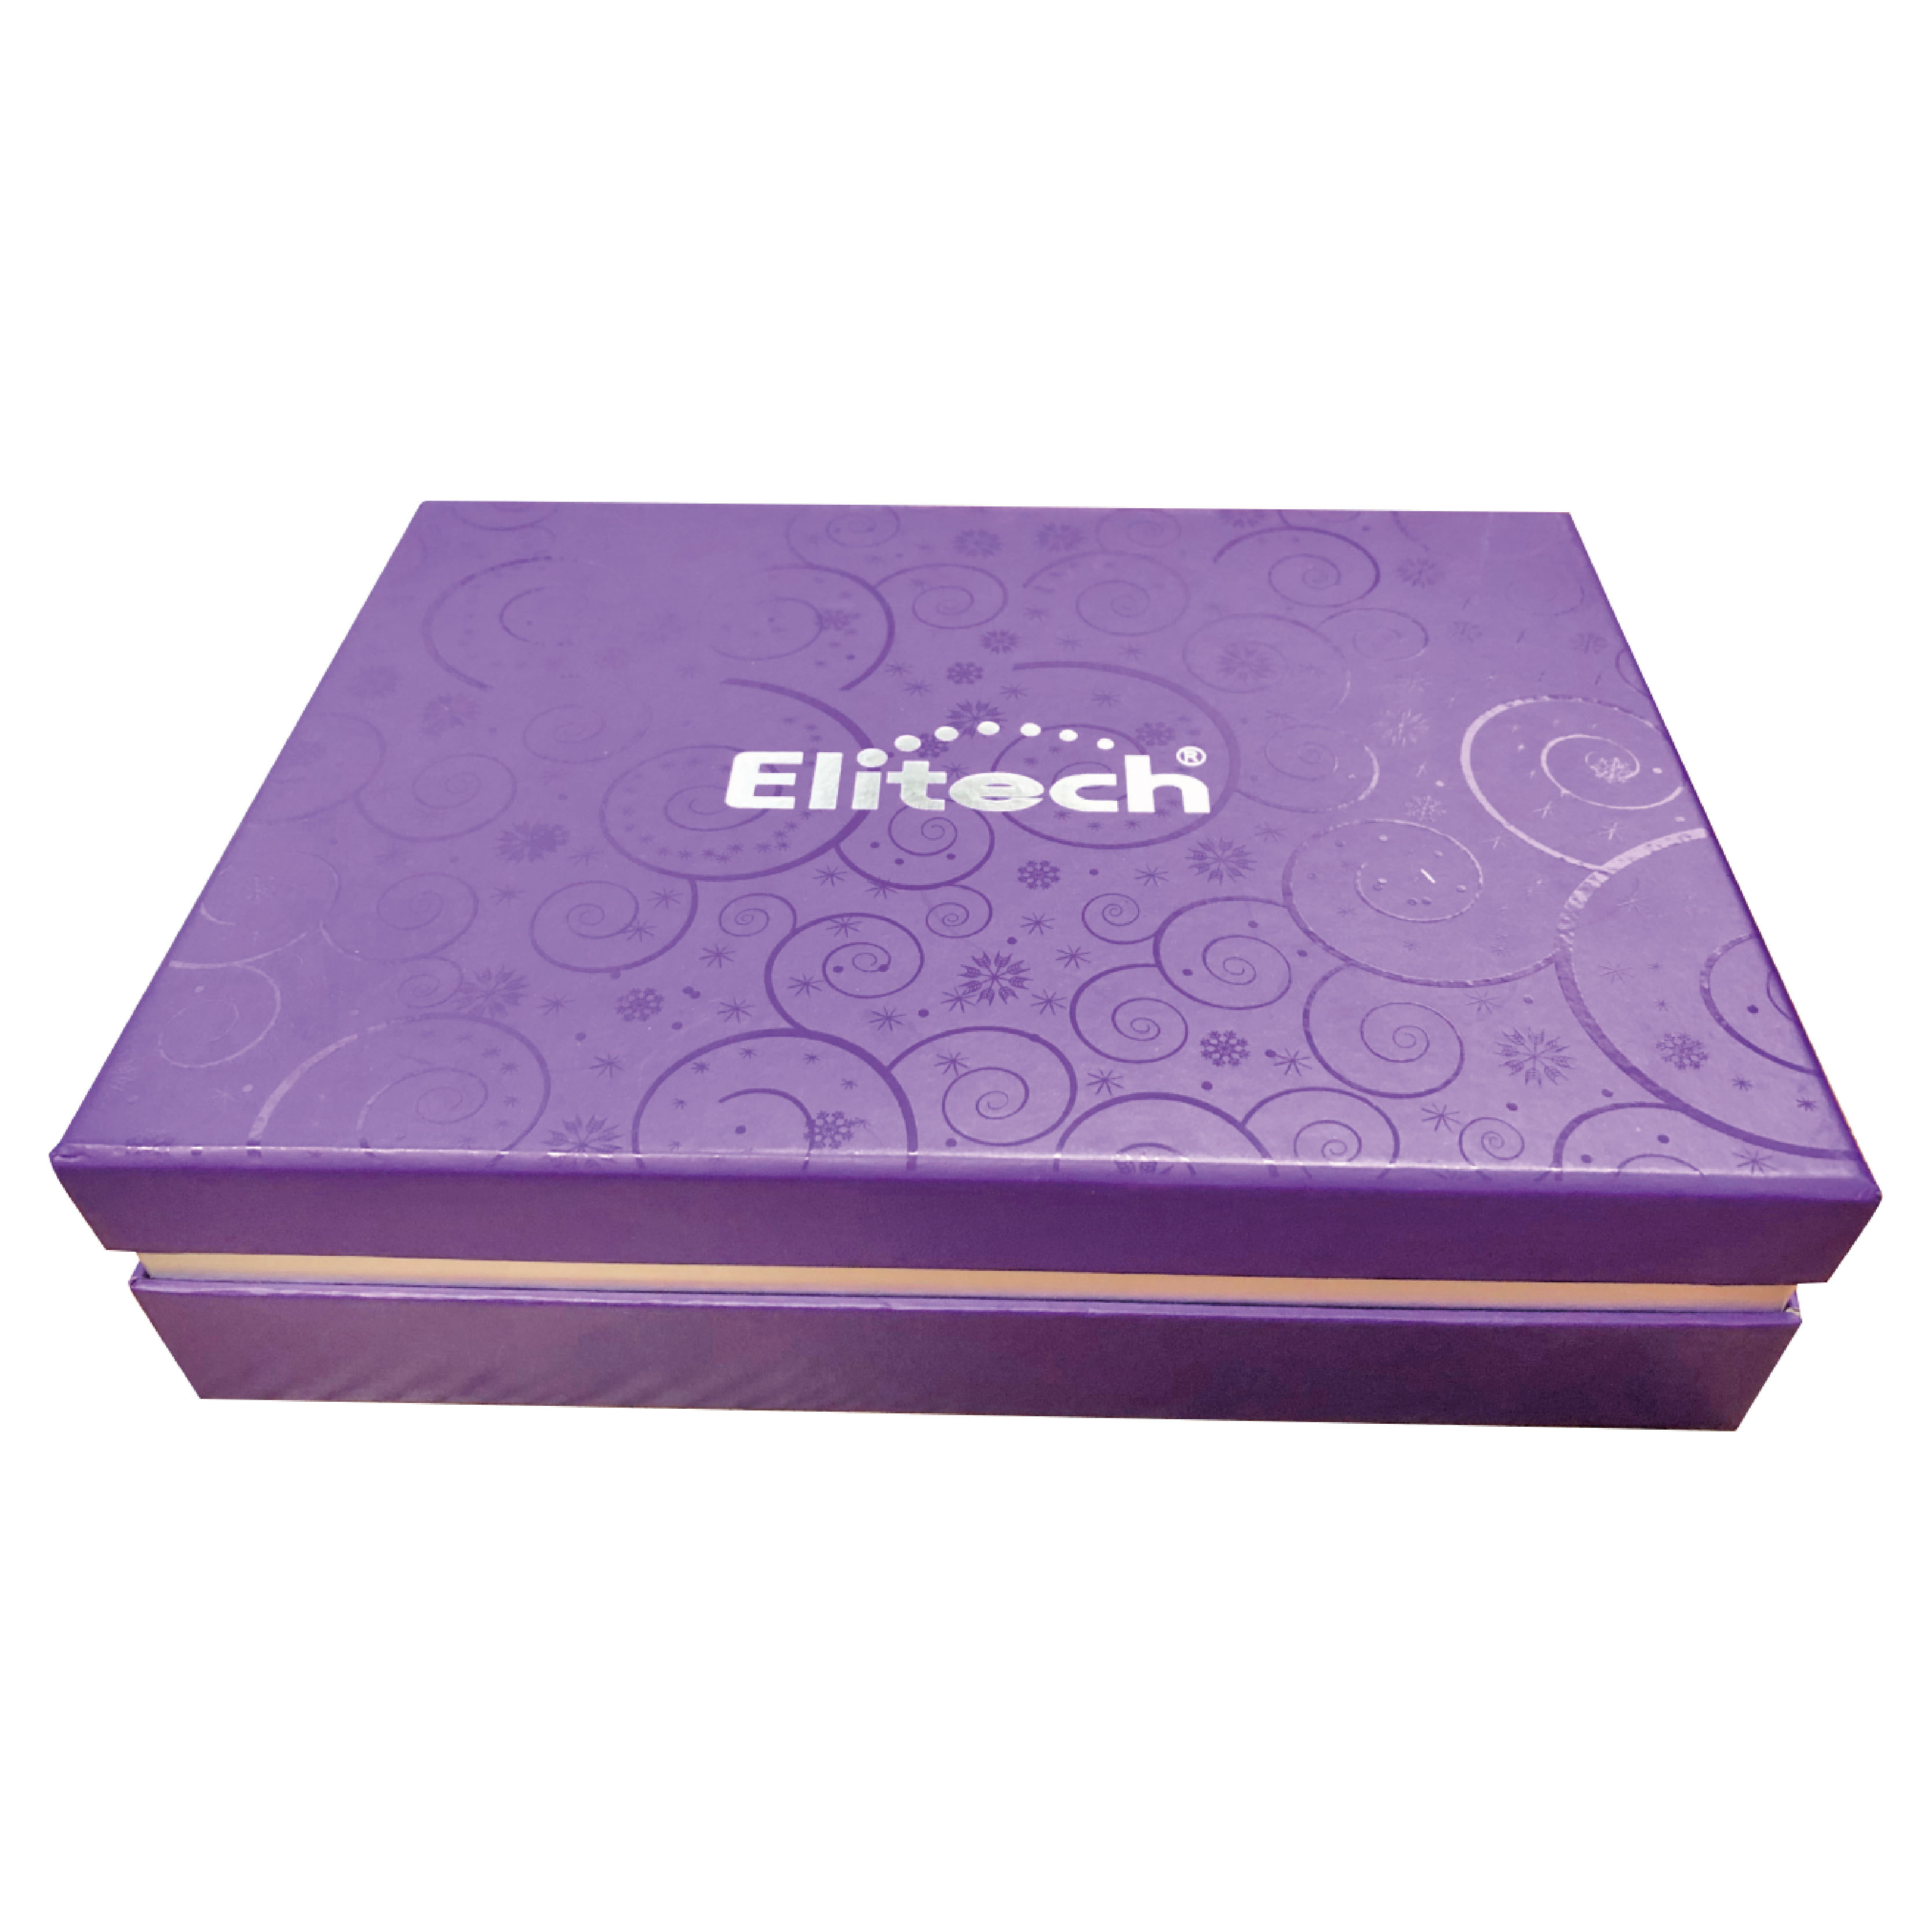 Cosmetic instrument gift boxes with EVA, silver stamping and matte lamination